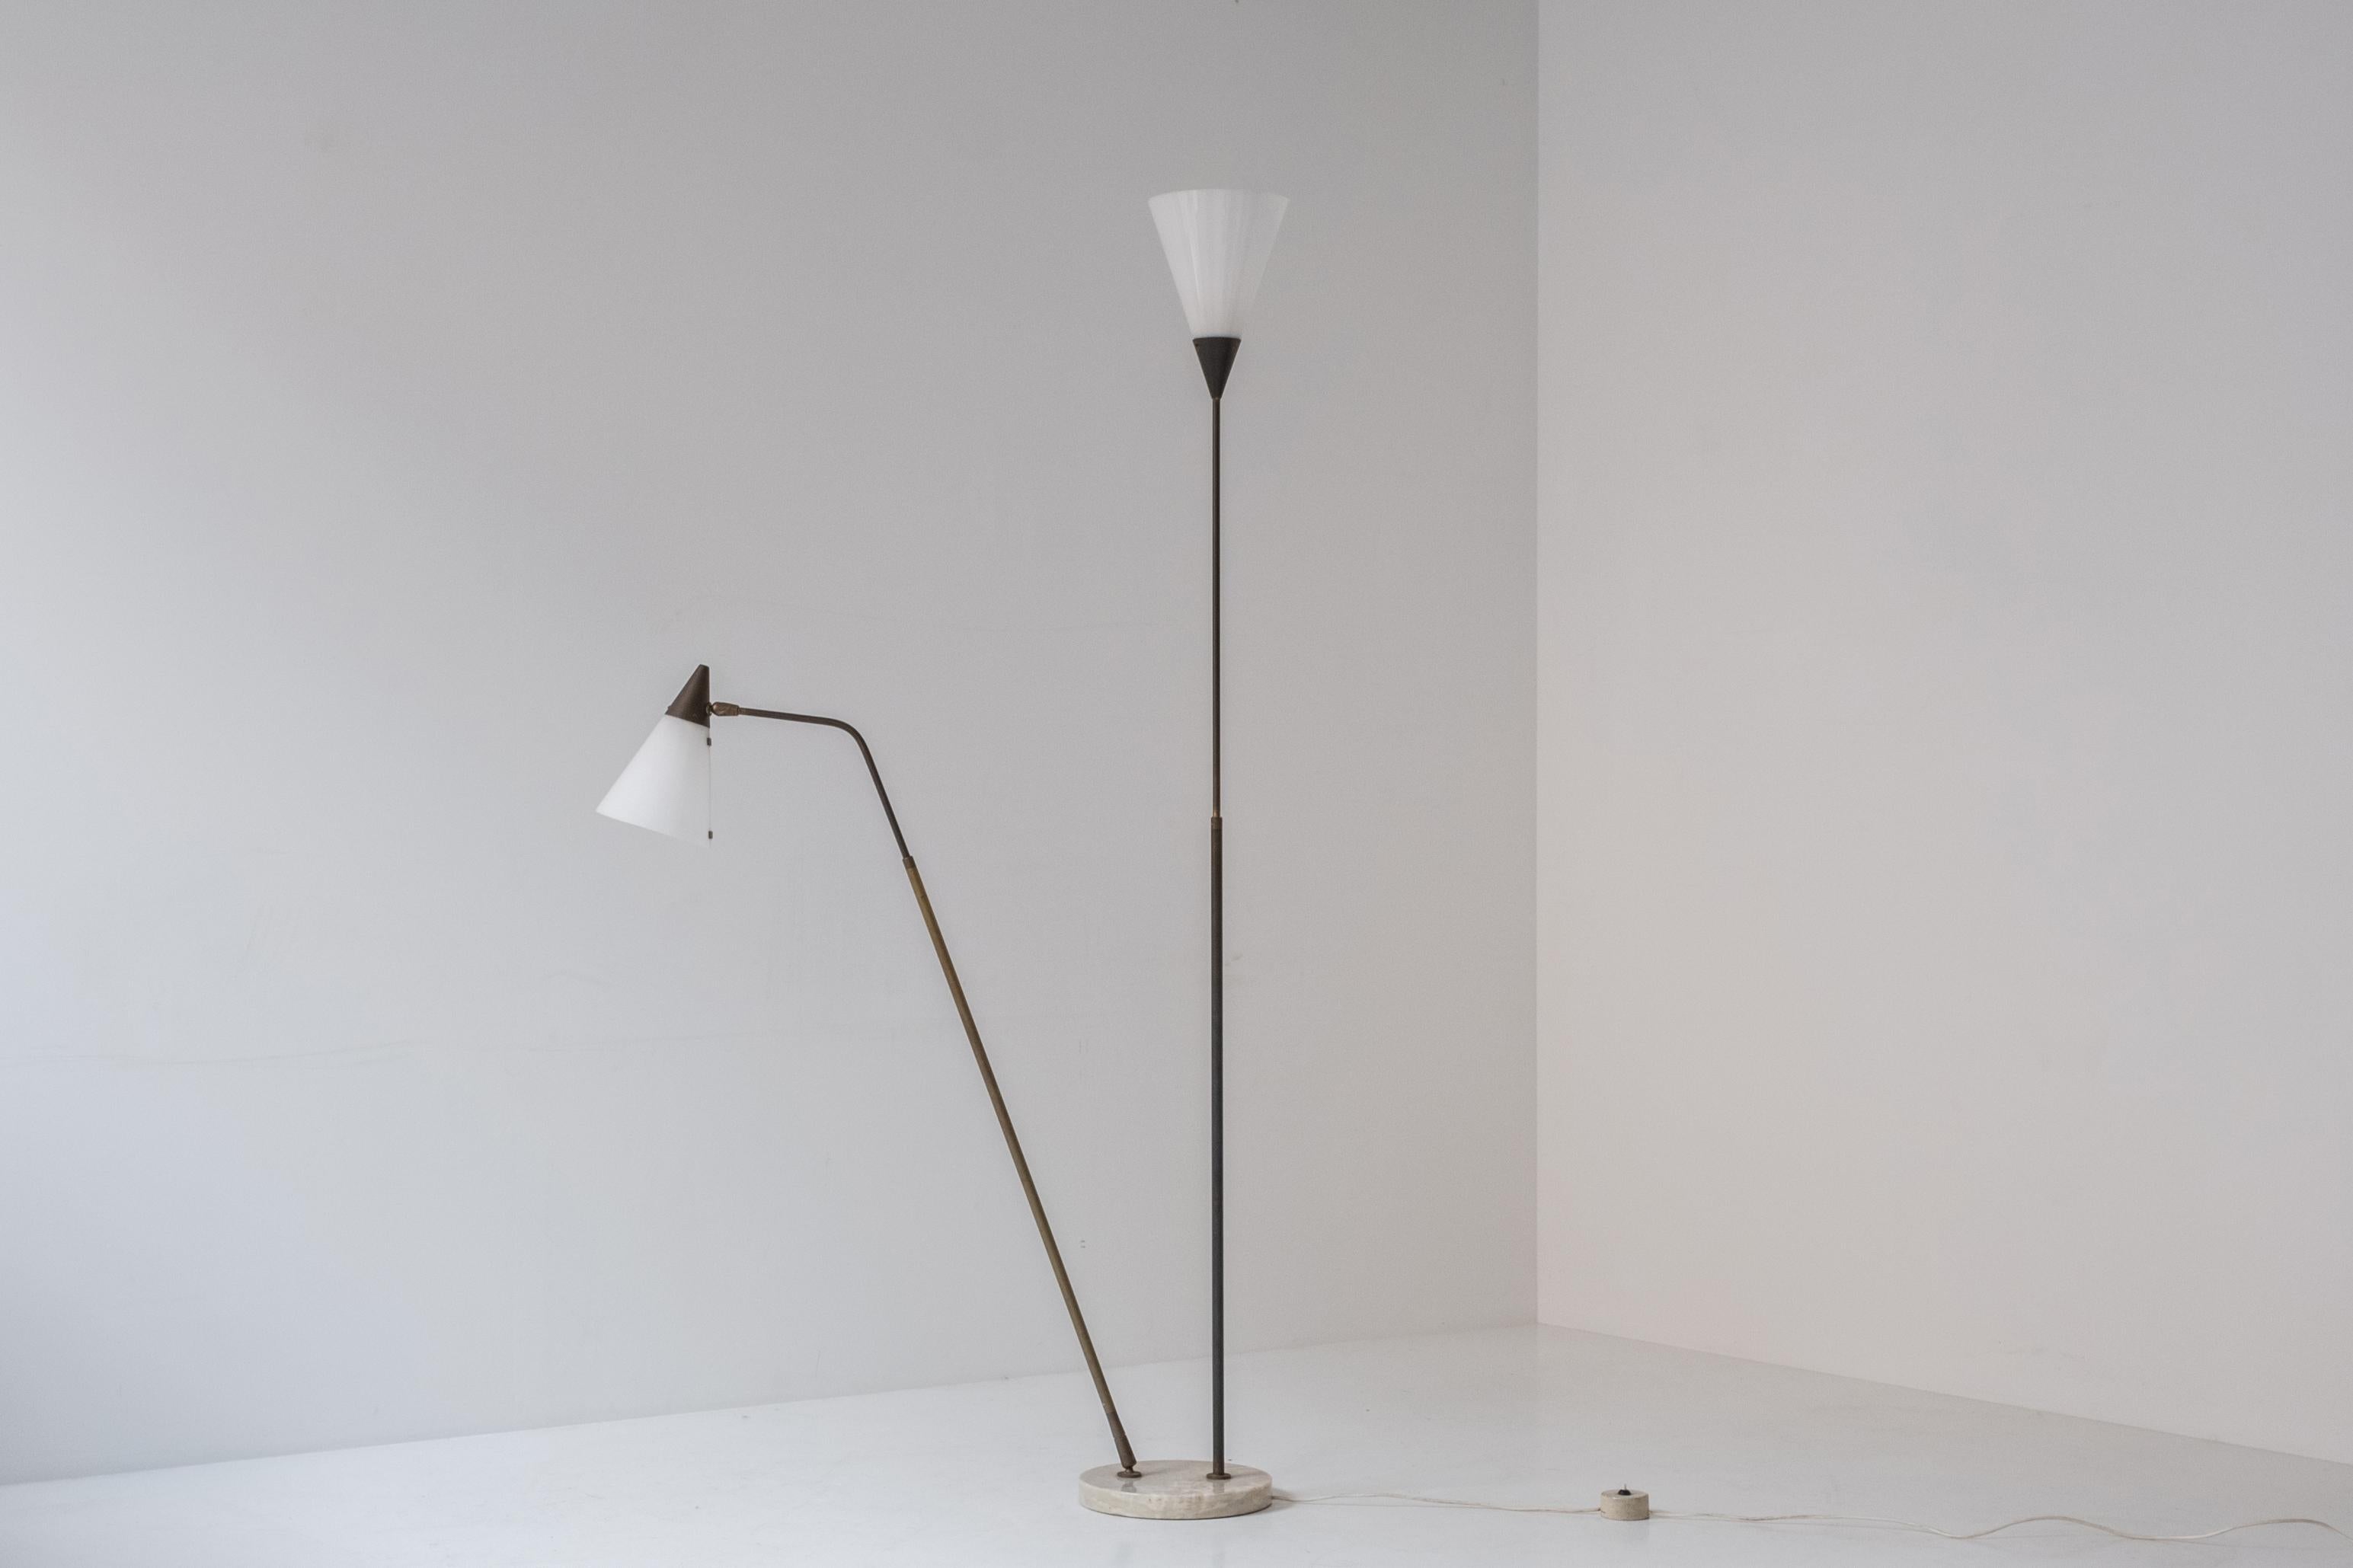 Rare 339-2 PX two armed floor lamp by Angelo and Giuseppe Ostuni & Renato Forti for Oluce, Italy 1952. This floor lamp features a marble base with two brass stems holding the original acrylic lampshades. Adjustable in height and allowing to be